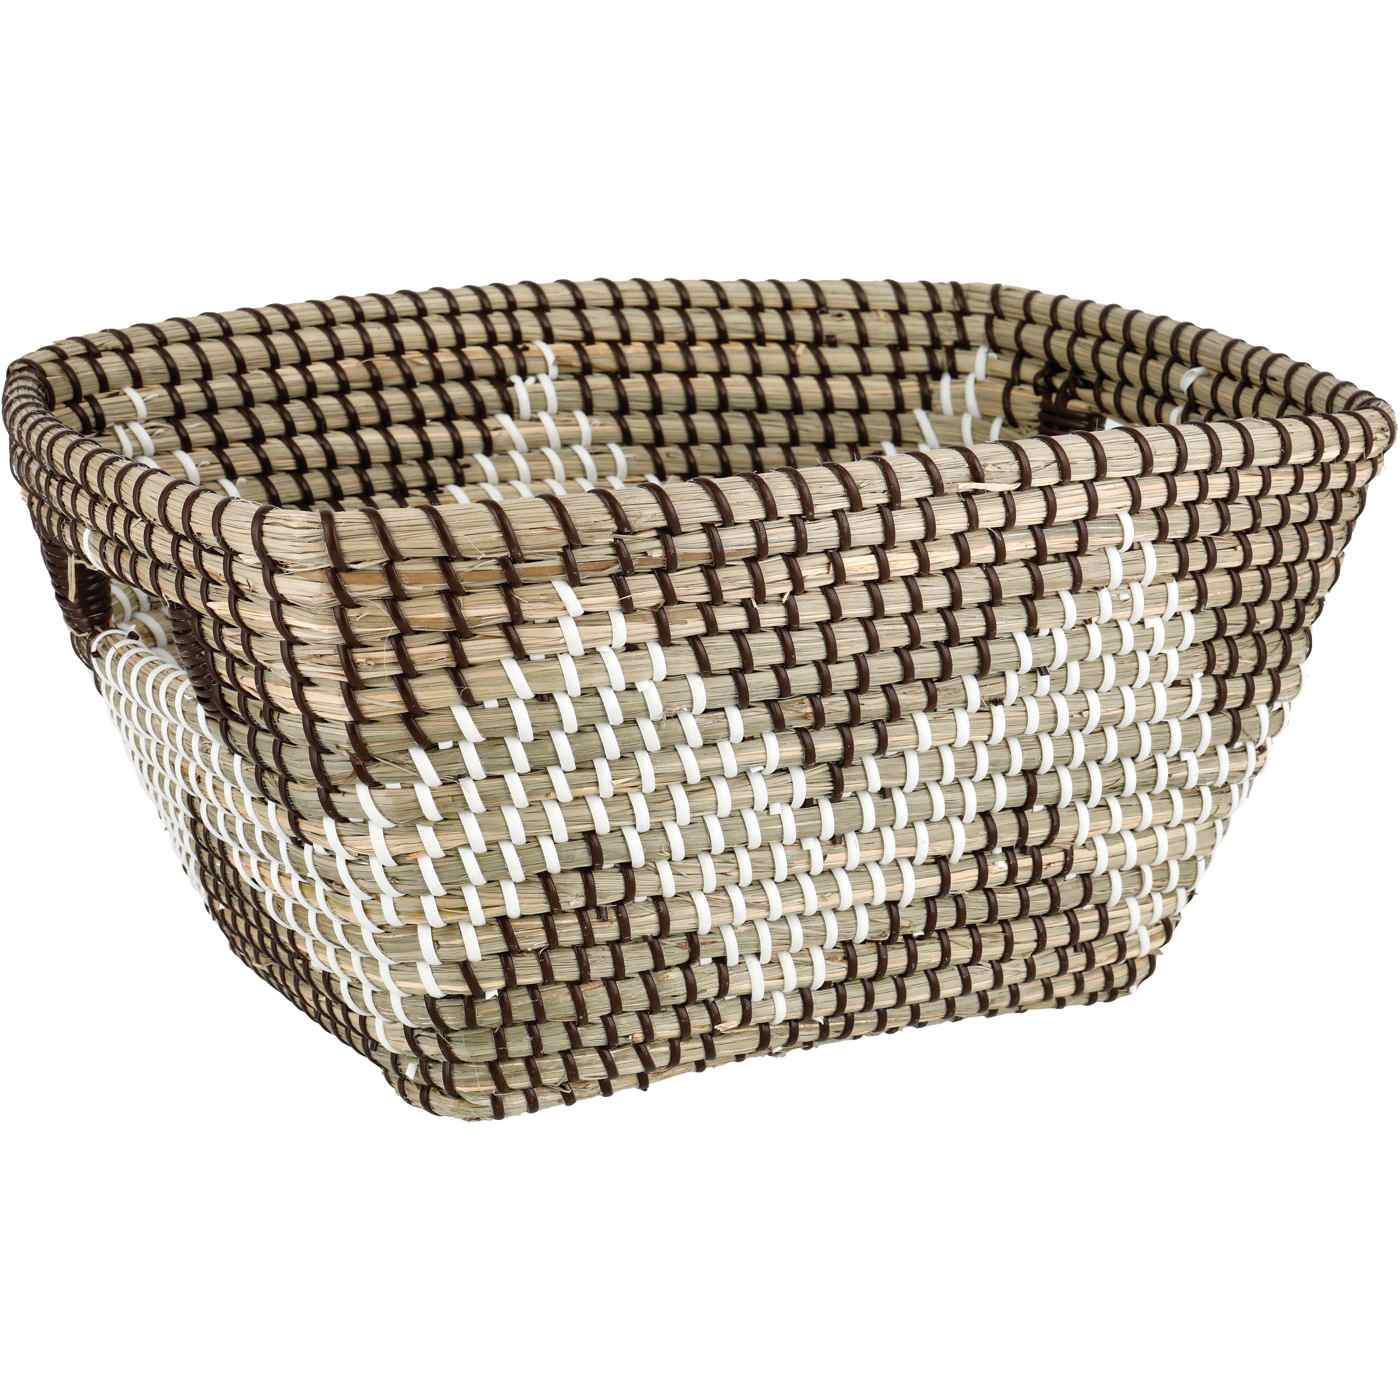 Haven + Key Tapered Woven Seagrass Basket; image 1 of 2